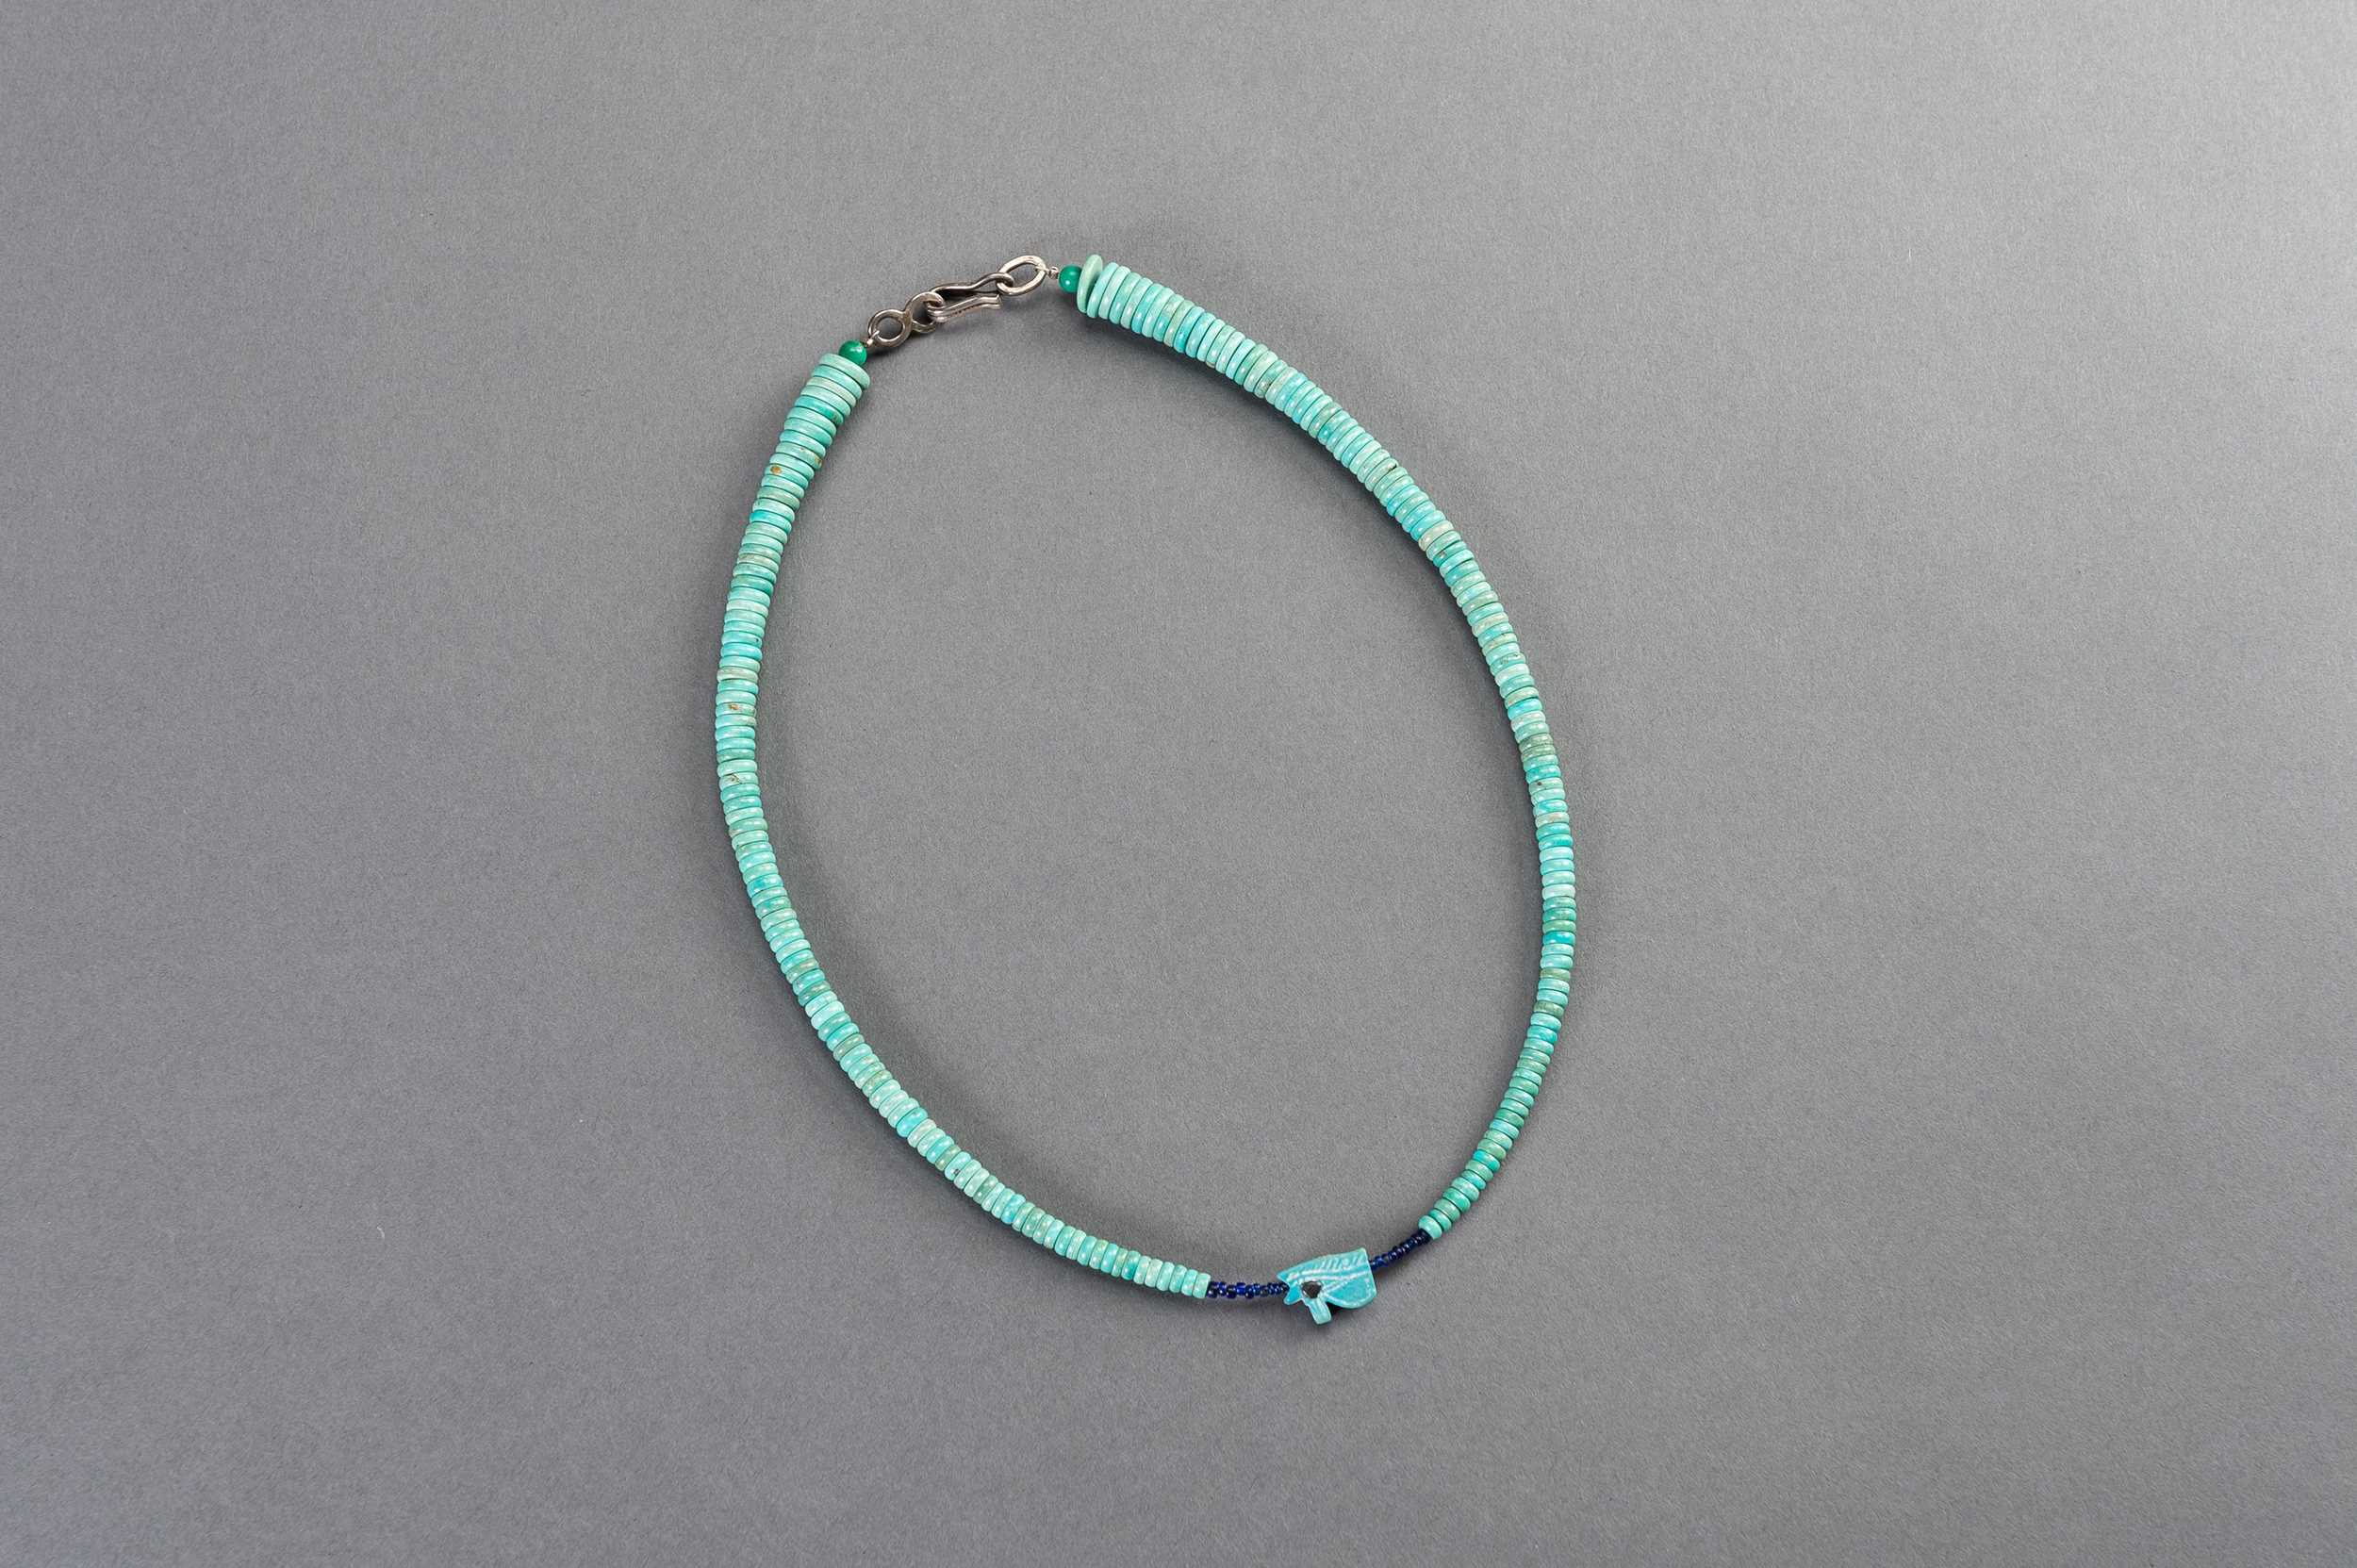 Lot 595 - A FINE NECKLACE WITH FAIENCE EGYPTIAN UDJAT EYE AMULET